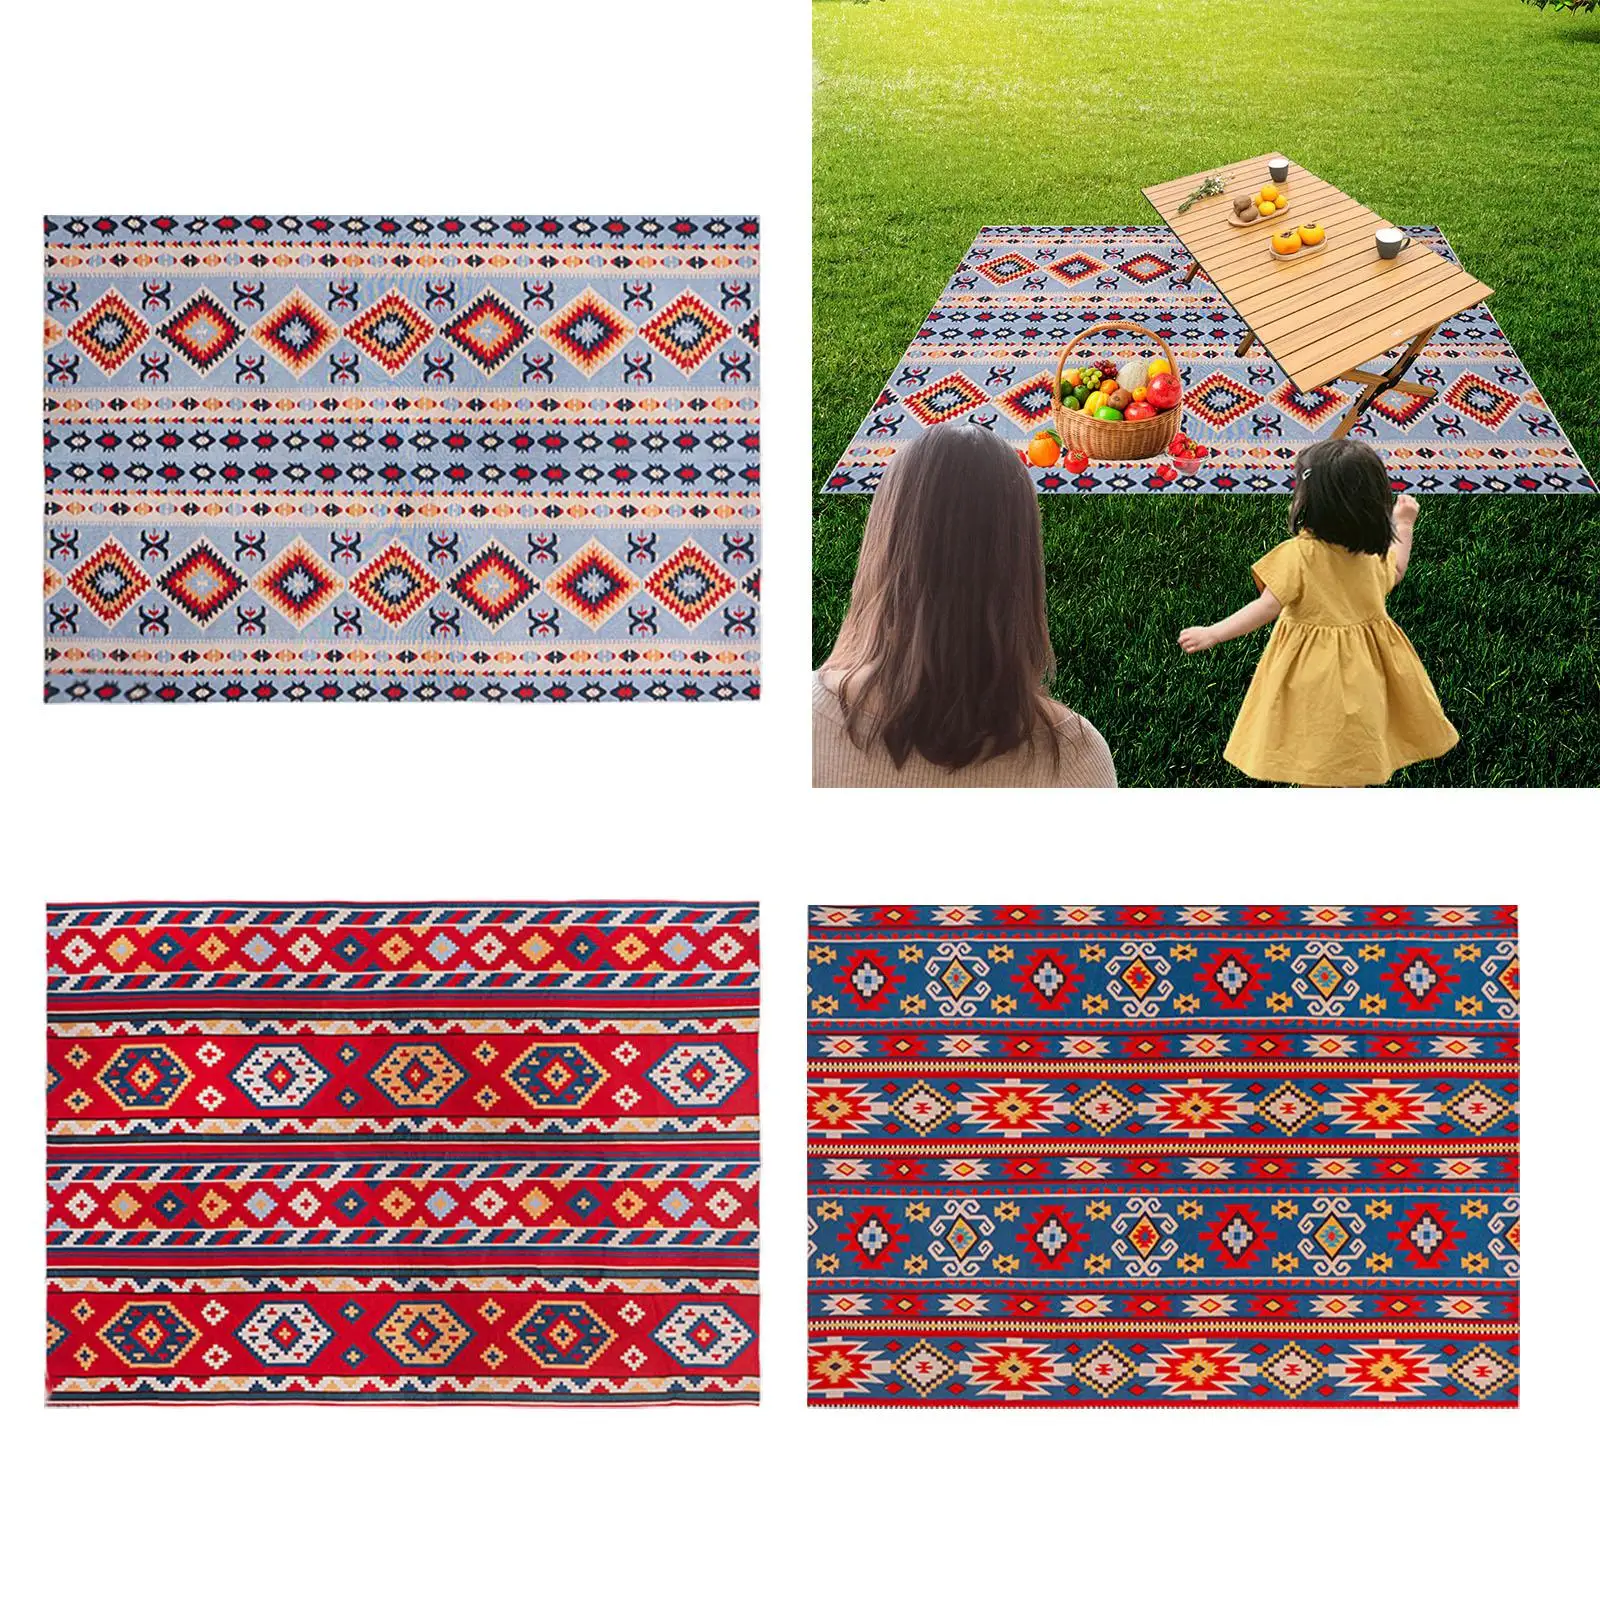 Large Picnic Outdoor Blanket Moistureproof Protective Waterproof Blanket Mat for Beach Music Festival Grass Travel Camping